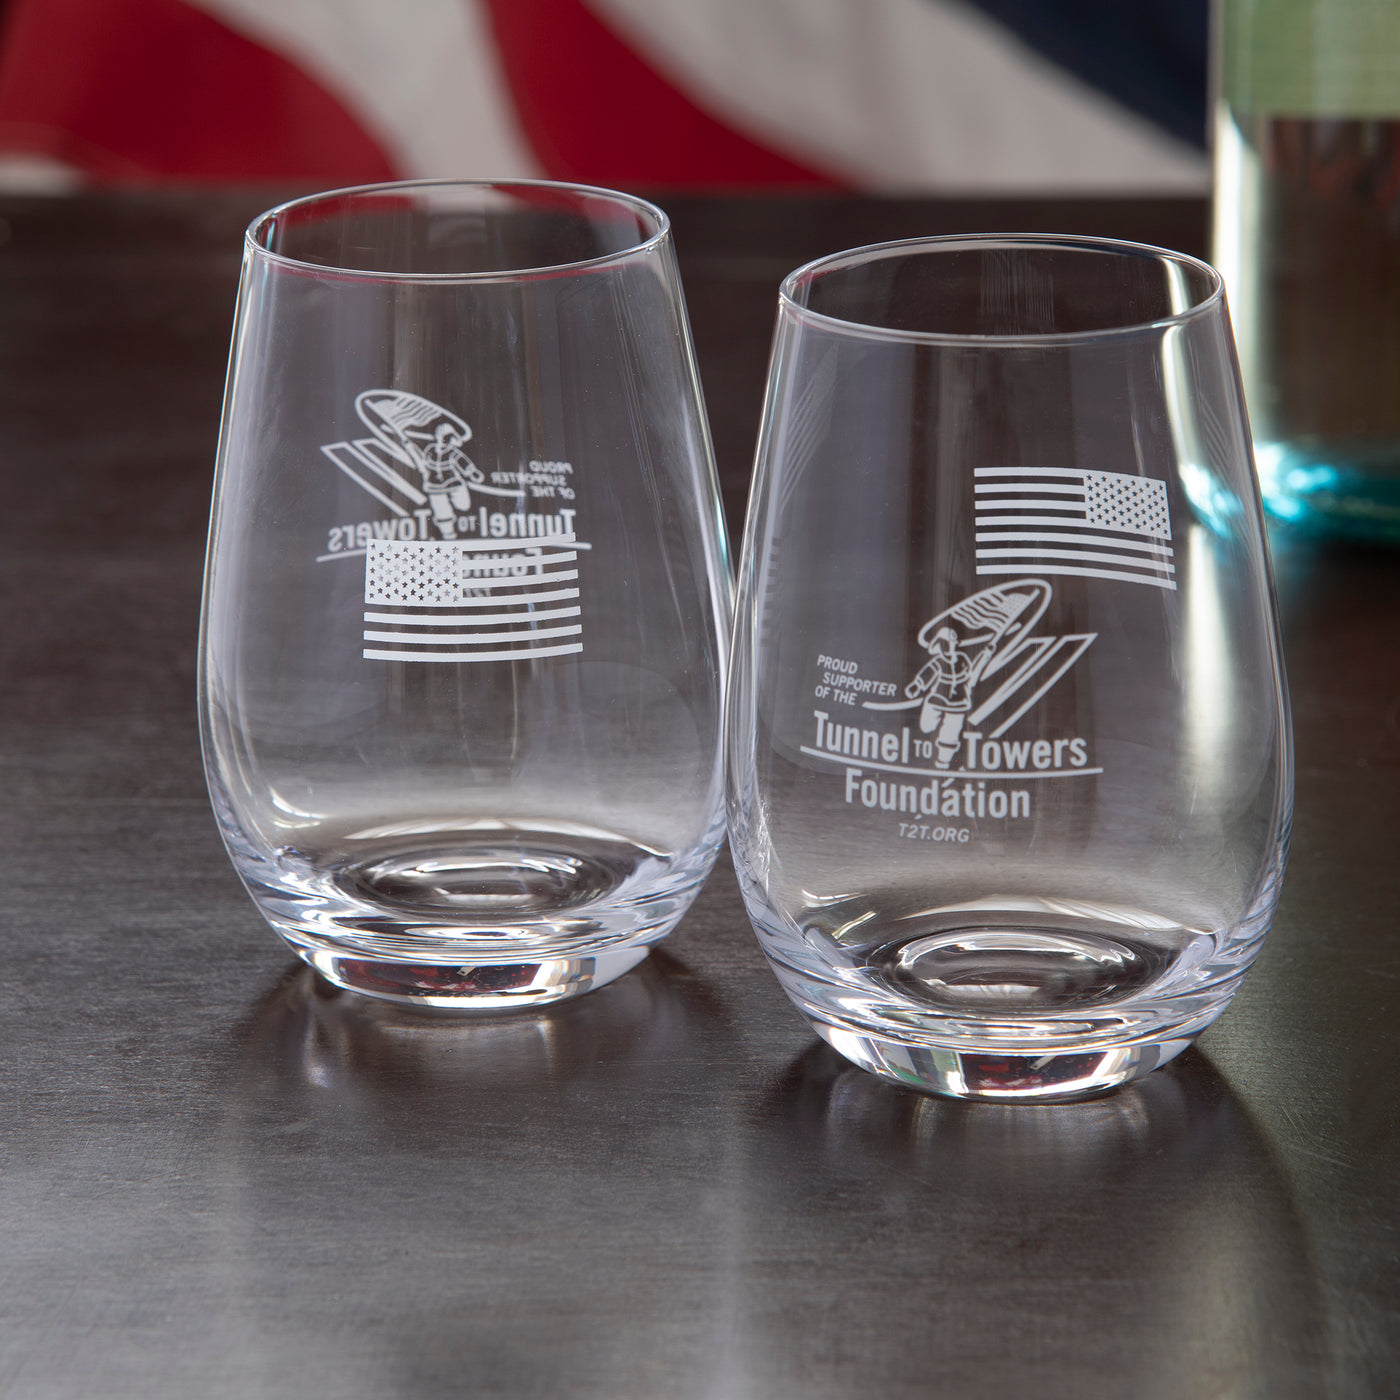 Tunnel to Towers Event 15 3⁄4 oz Tumbler - Set of six.